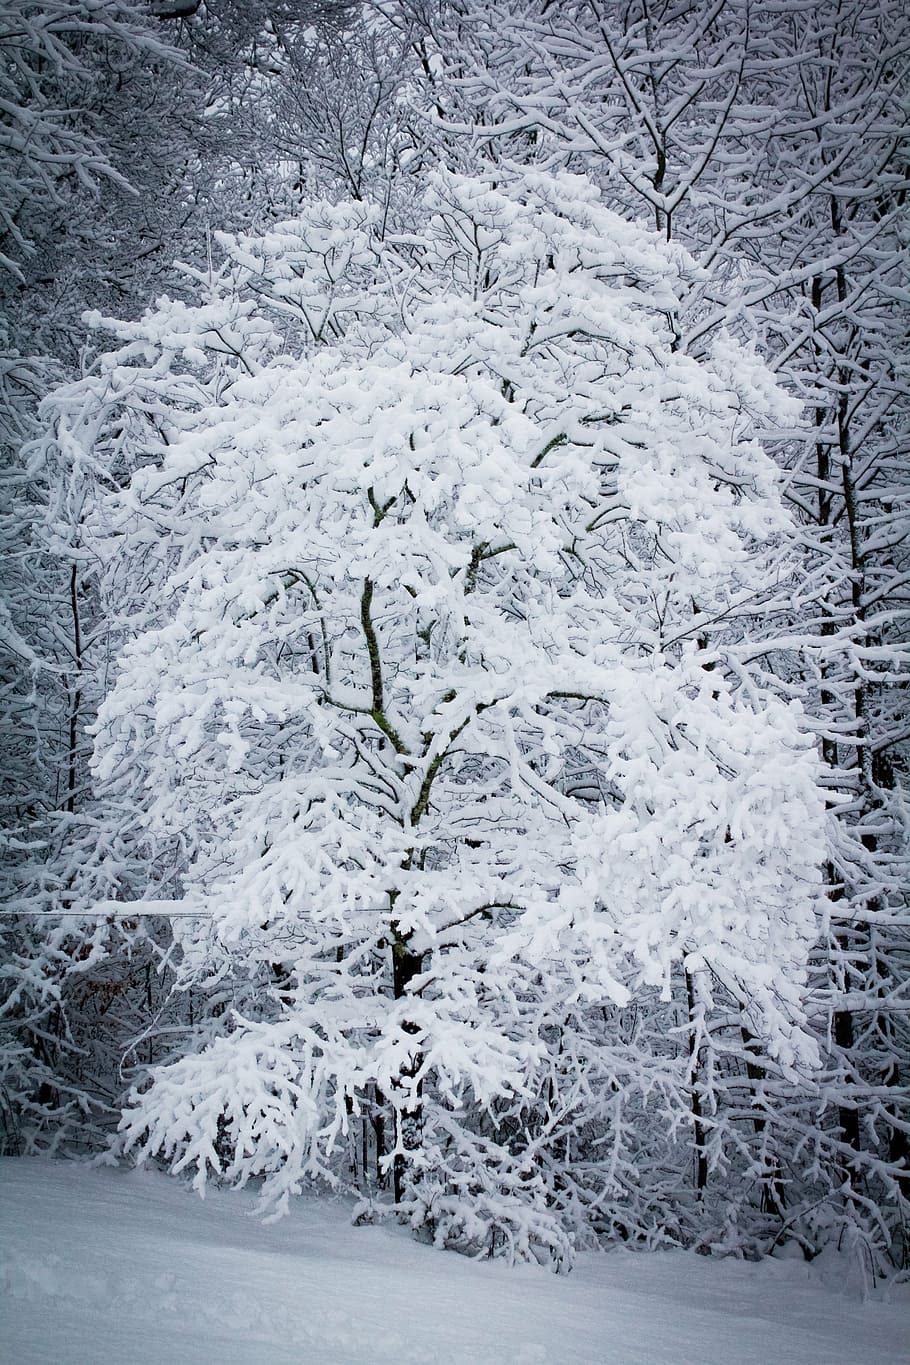 snow, snowstorm, snowy, weather, winter, snowing, tree, white